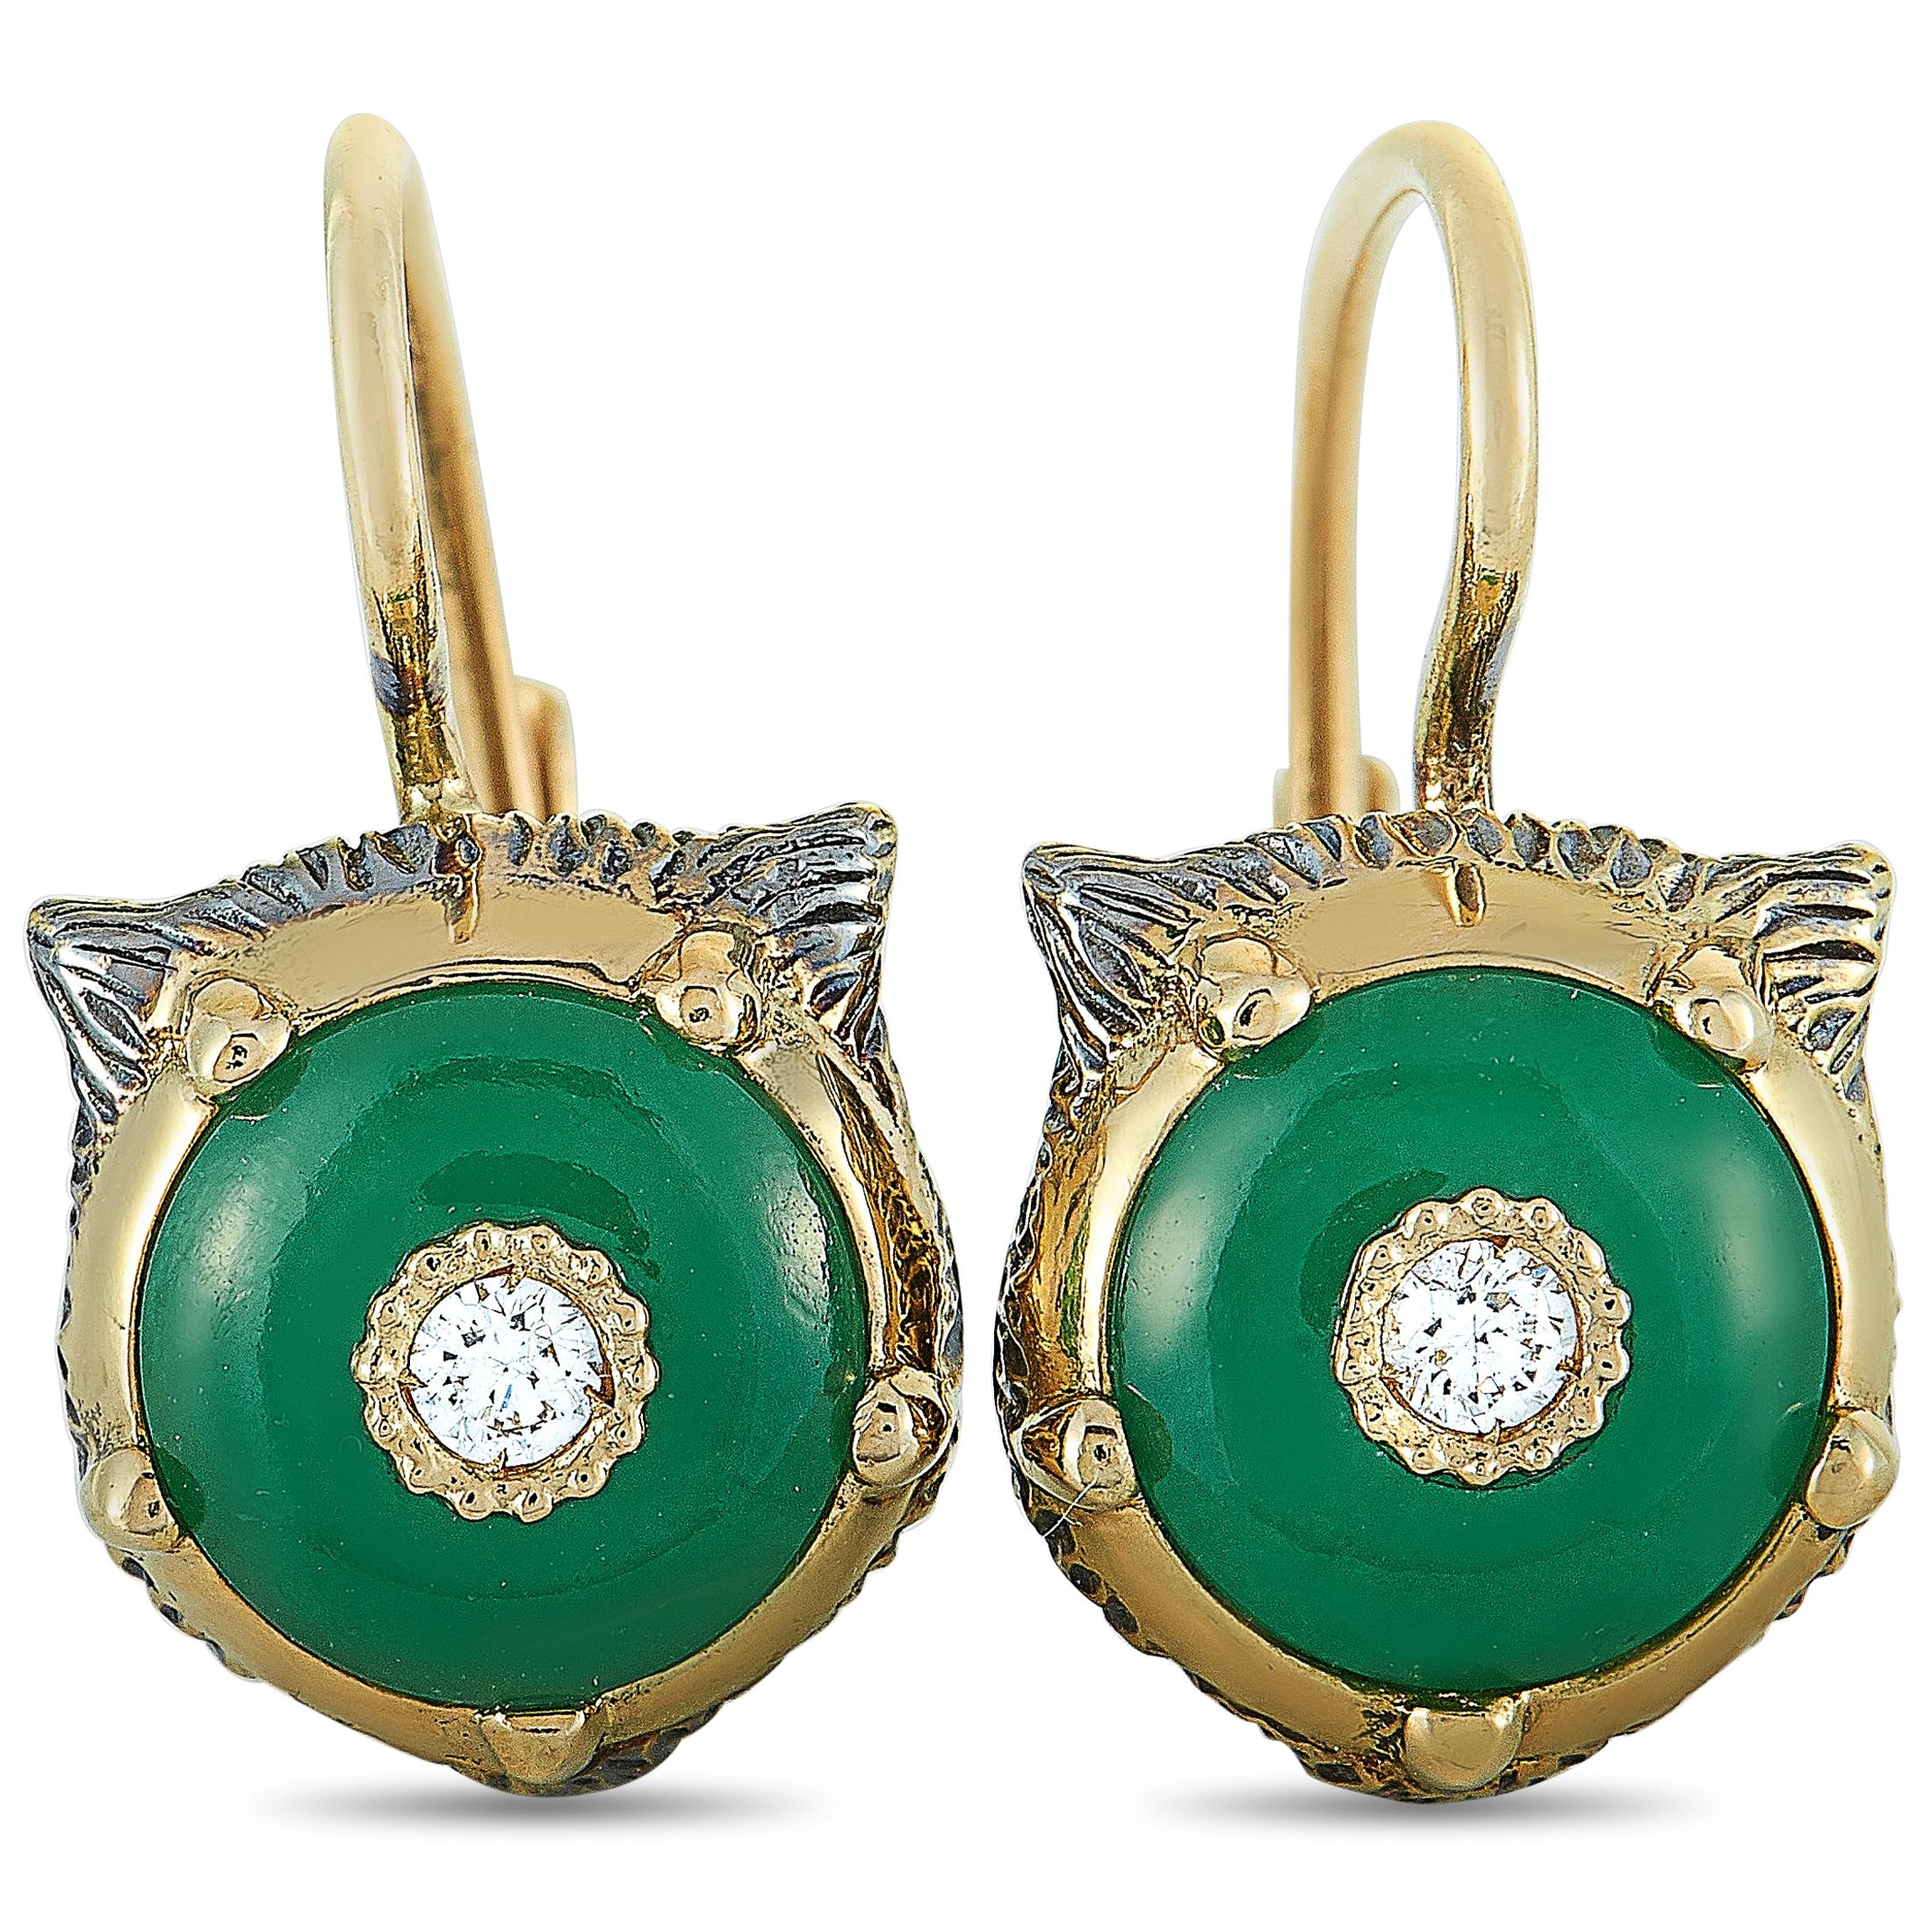 The Gucci “LMDM” earrings are crafted from 18K yellow gold and set with diamonds and jades. The jades weigh approximately 2.90 carats in total and the diamonds amount to approximately 0.10 carats, boasting GH color and VVS clarity. The earrings